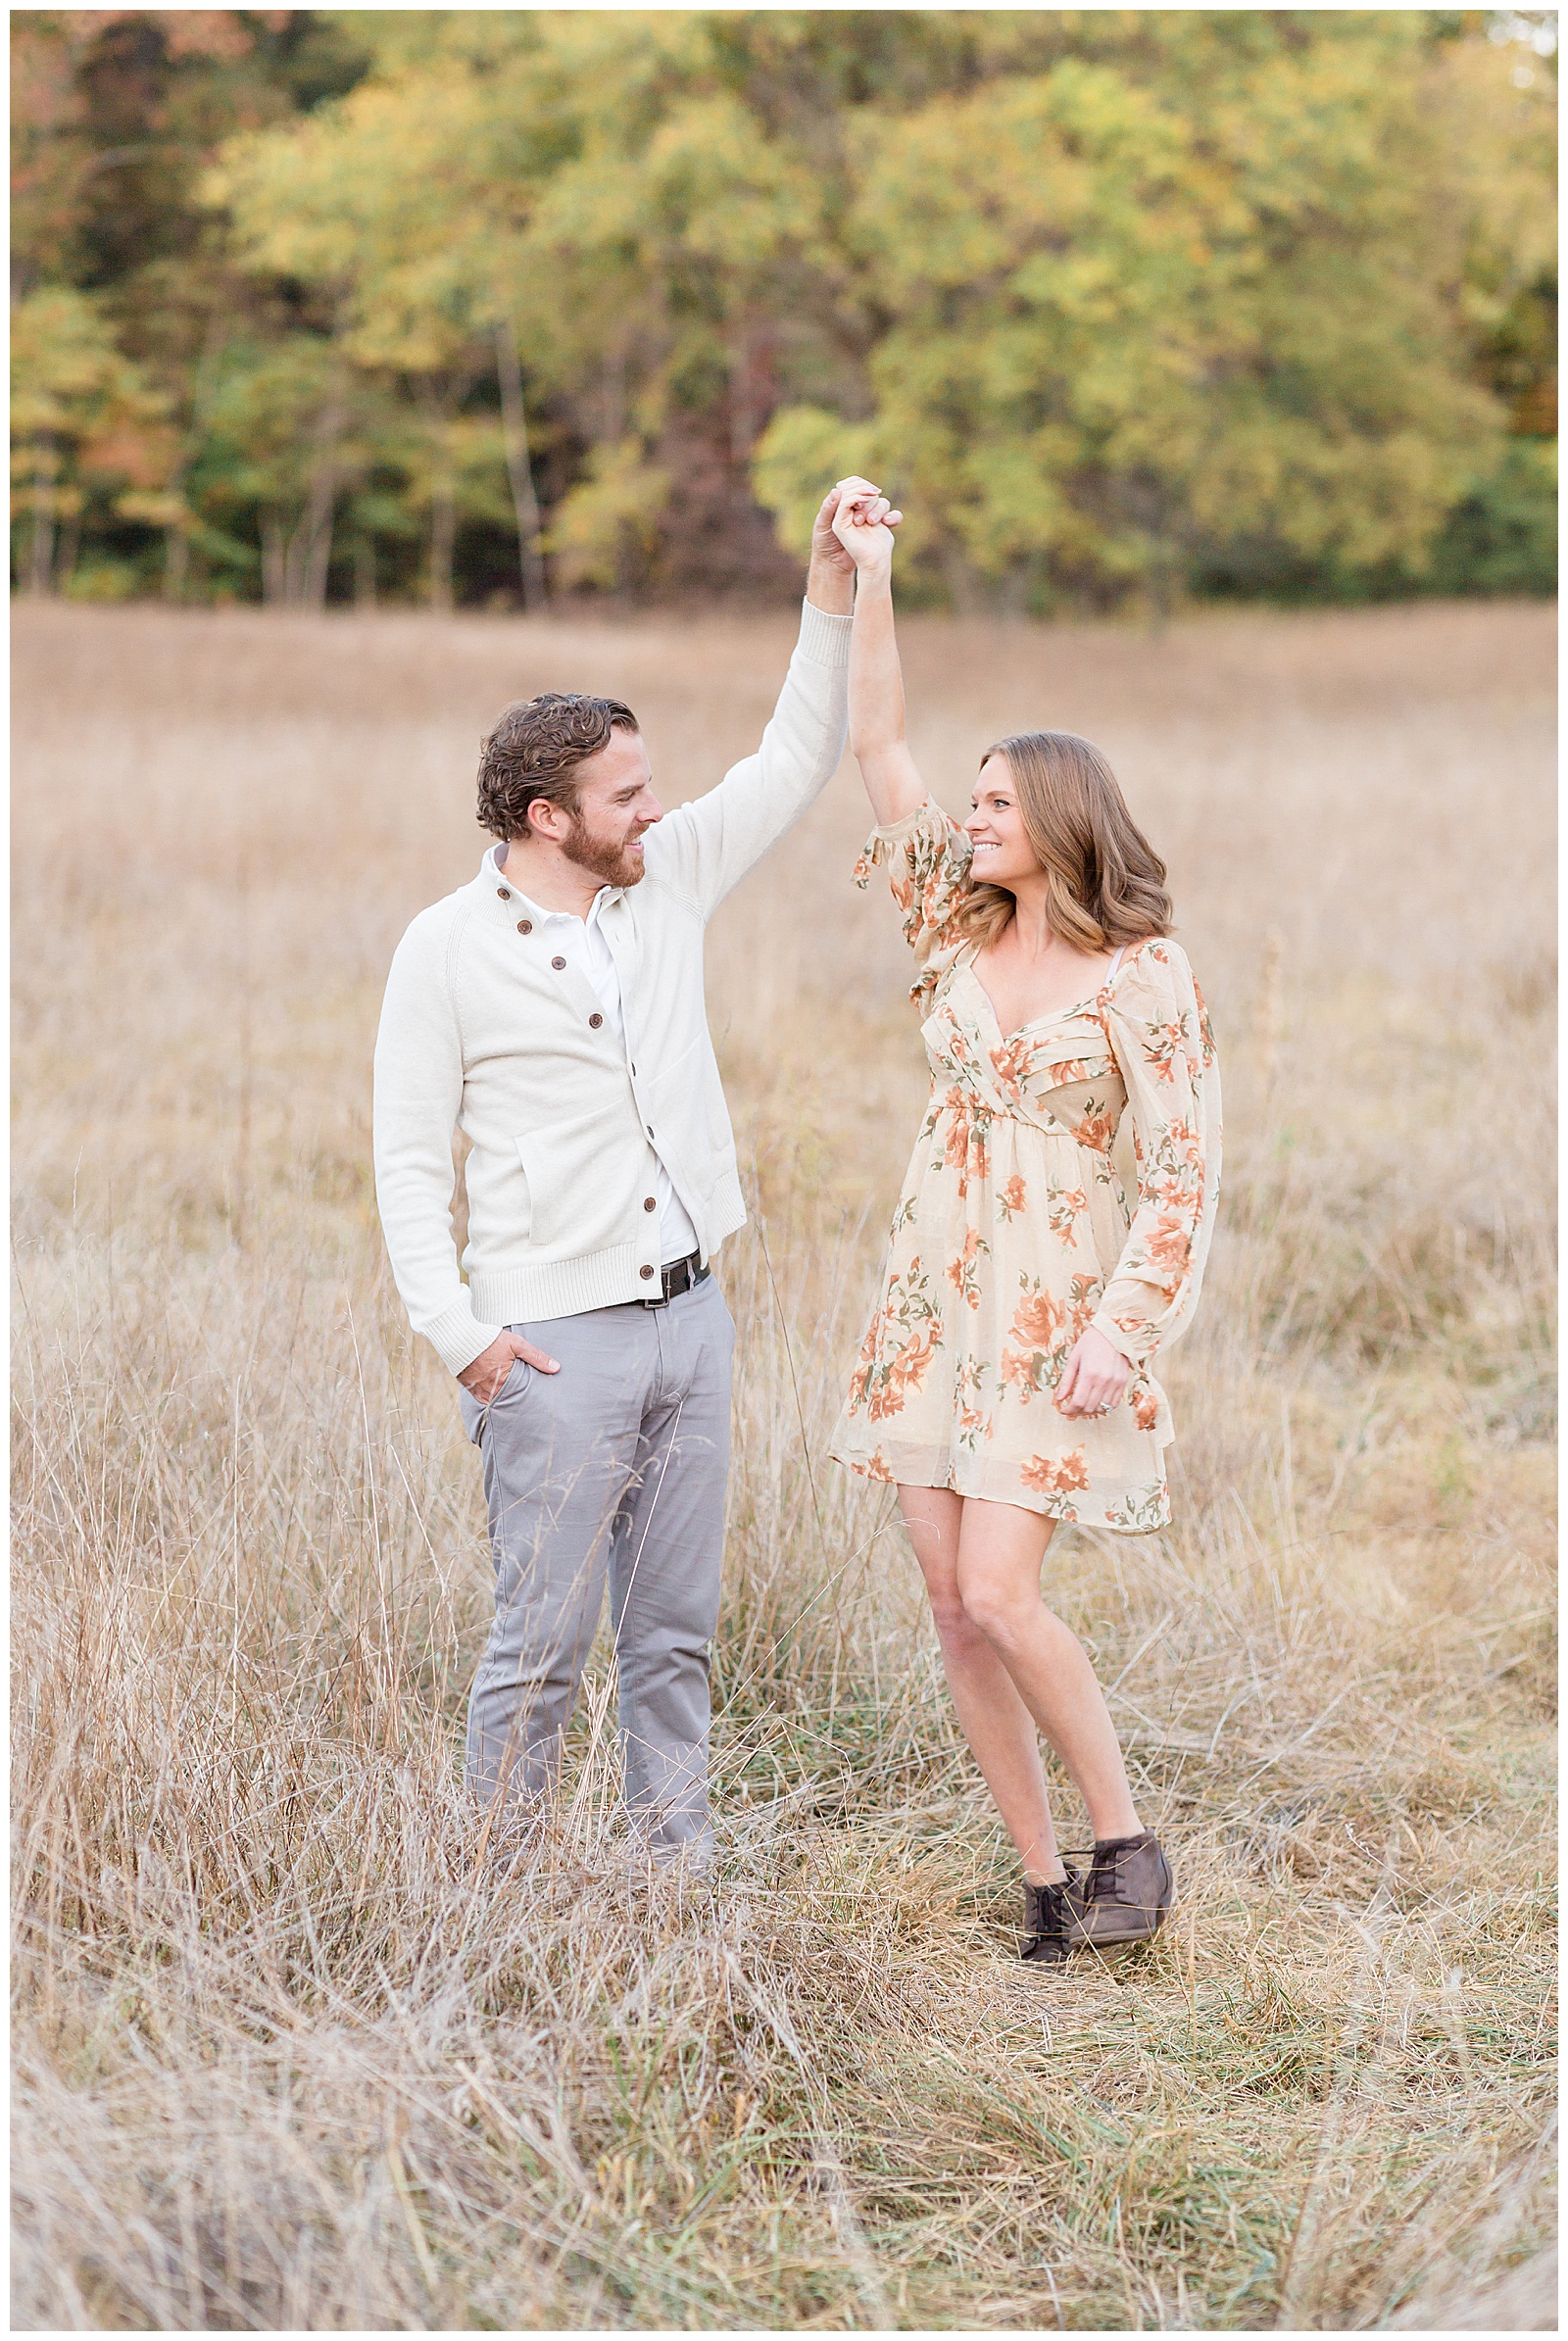 Mom and Dad share a moment together in a field in Nashville as husband twirls his wife and they look at each other while doing so.